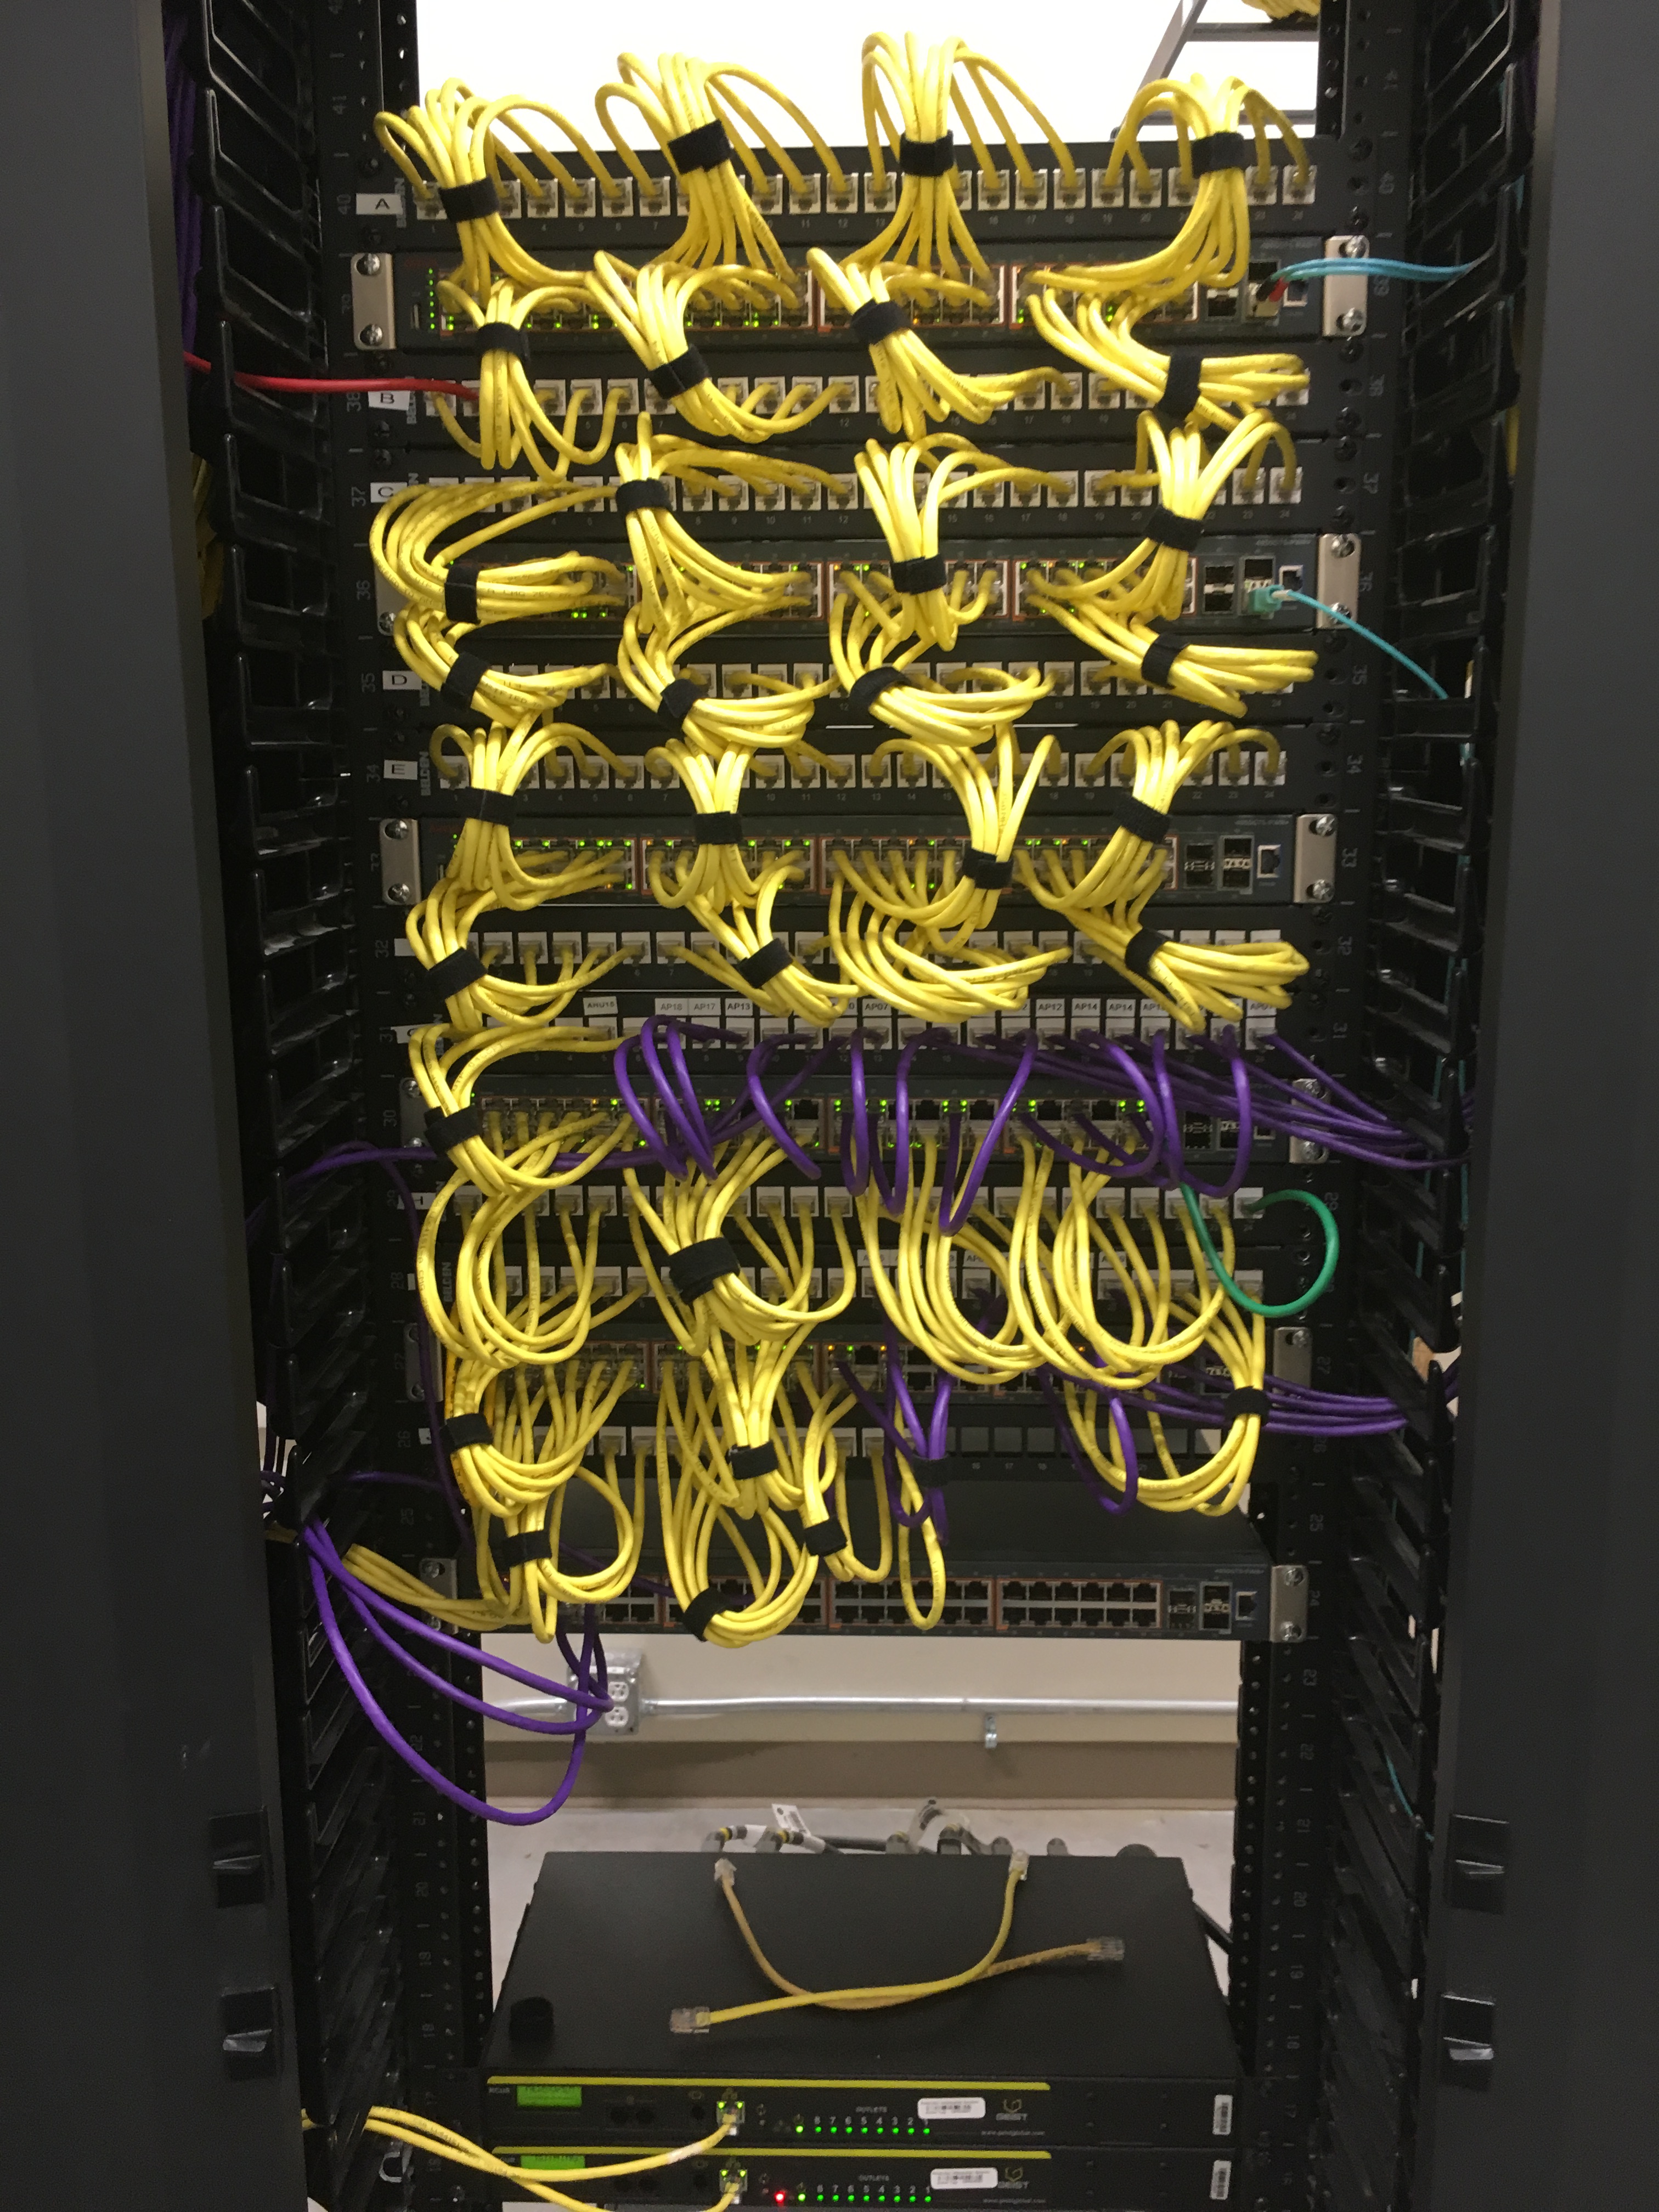 Dell Seton Medical Center case study - healthcare cabling and infrastructure